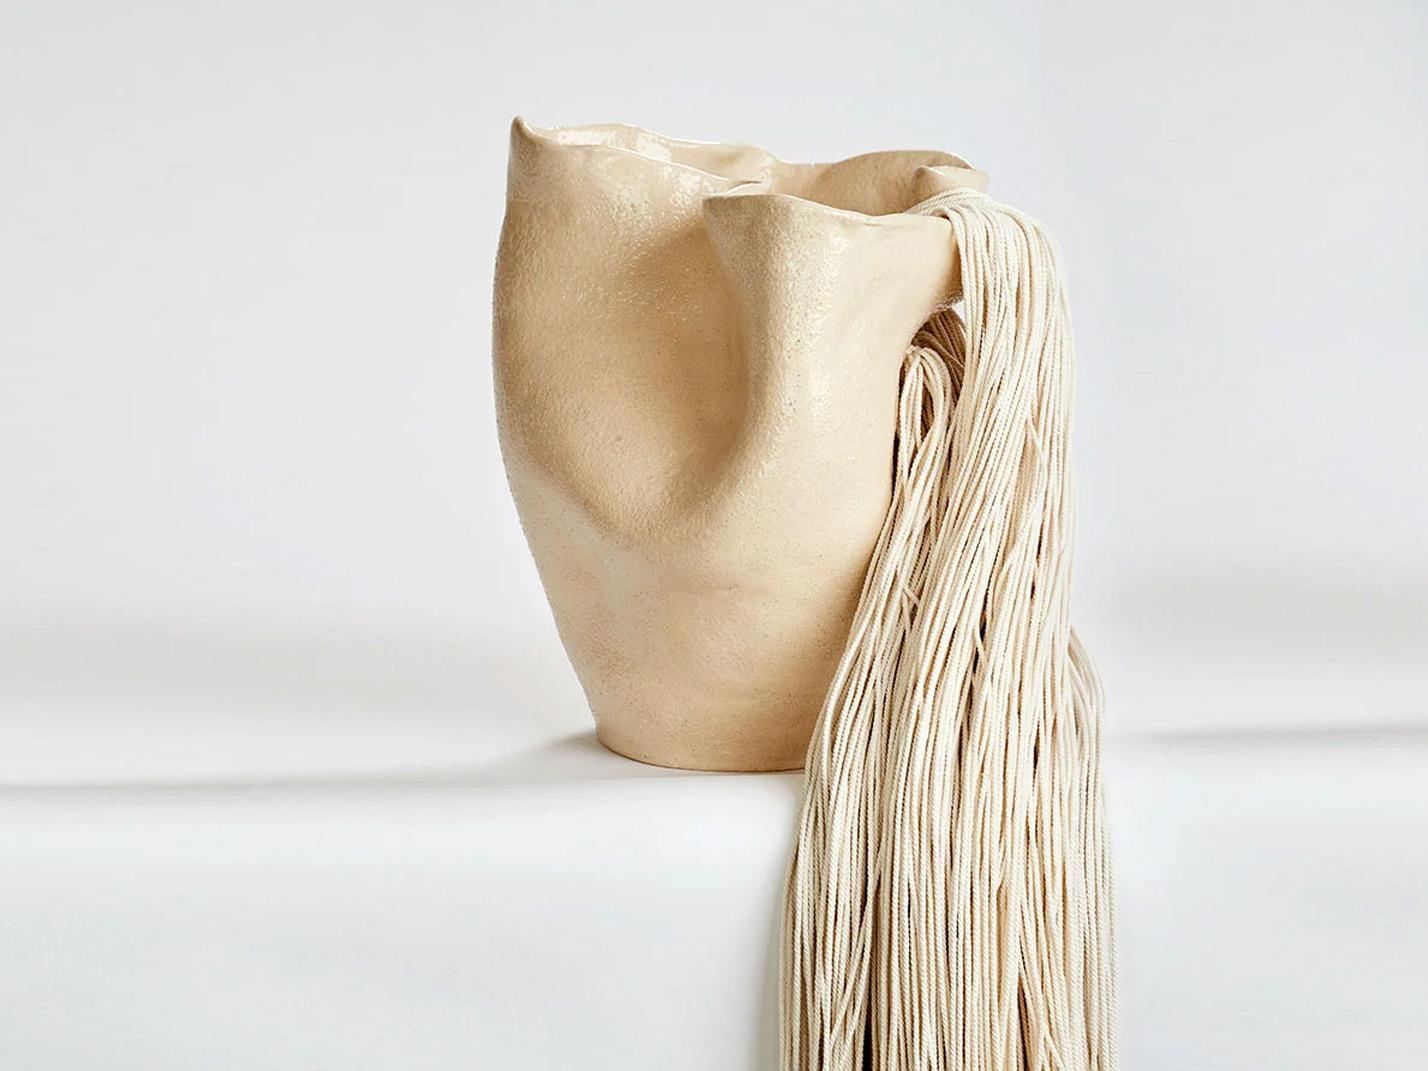 ASTREA, 2023 by Magda von Hanau
From the Visceral series
Clay, glass glaze & wool strings. 
Dimensions: 37 cm H x 37 cm W 
Weight 20lbs

The Visceral series delves into the intricate relationship between the mind and the body, specifically focusing